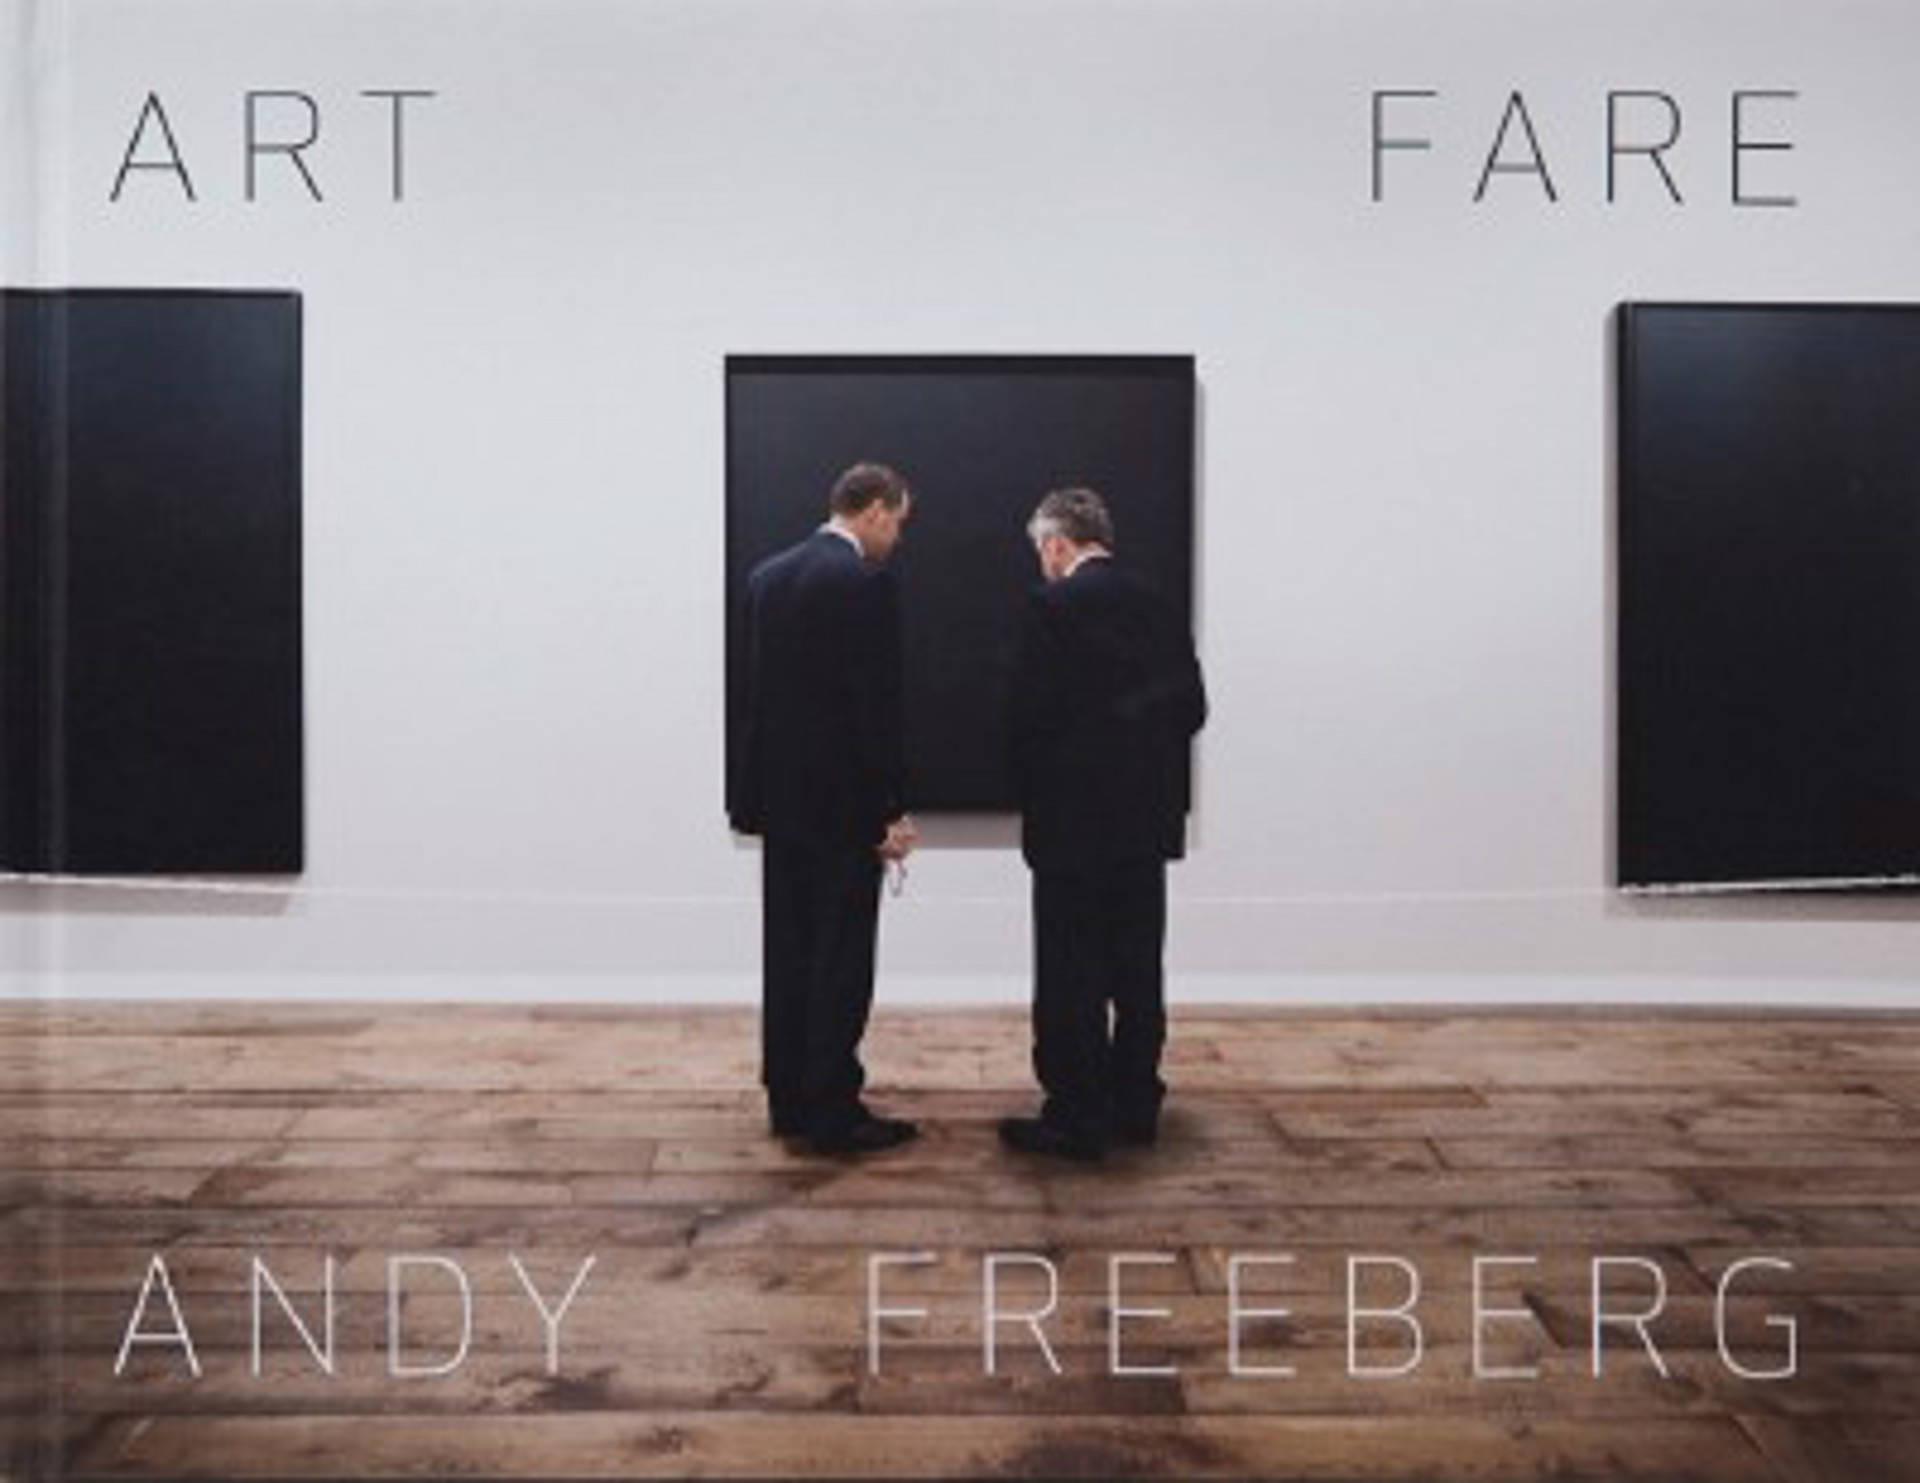 Art Fare by Andy Freeberg